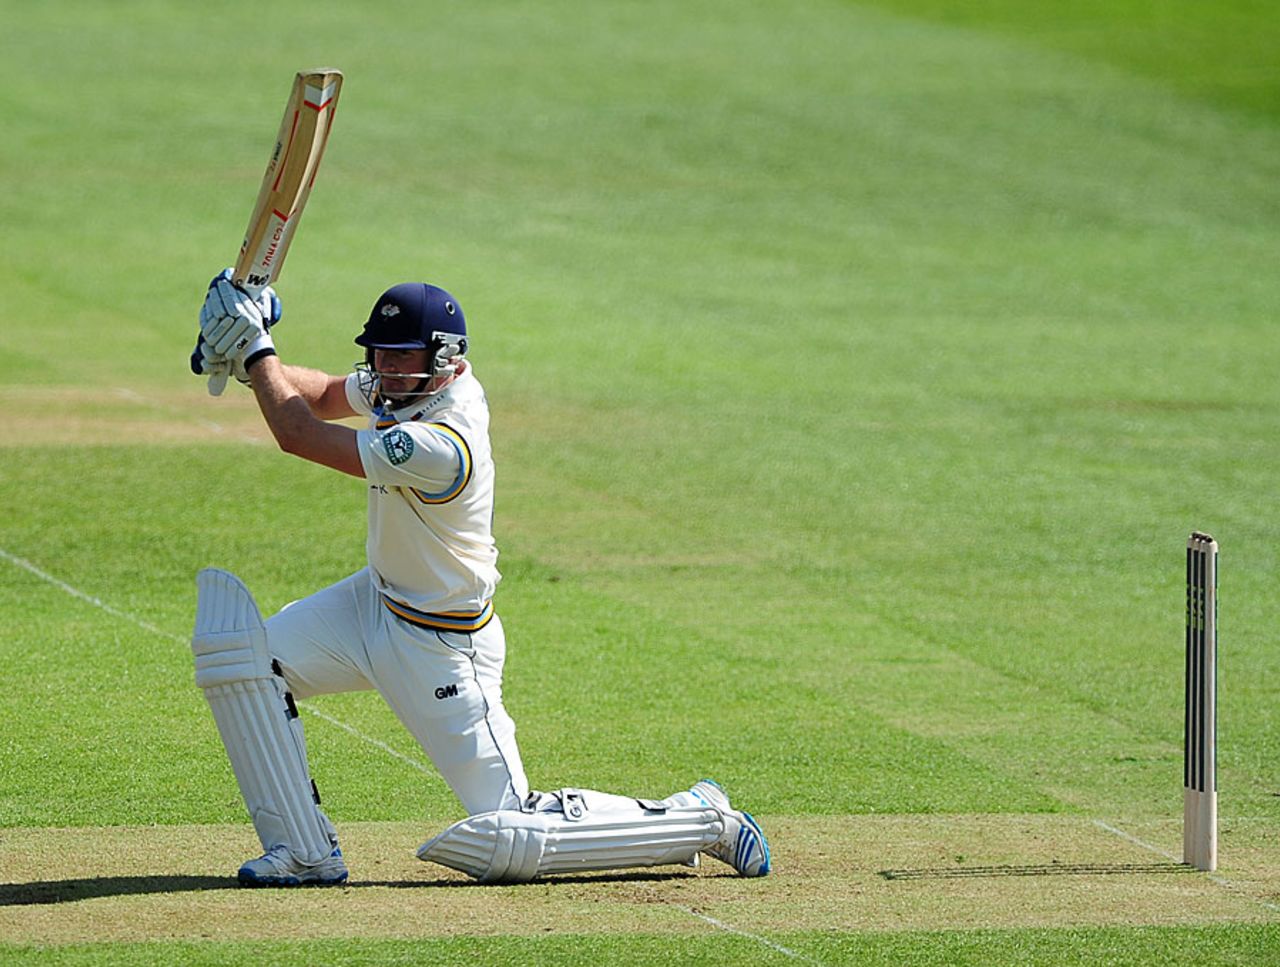 Adam Lyth drives on his way to 85, Somerset v Yorkshire, County Championship Division One, Taunton, 1st day, April 13, 2014